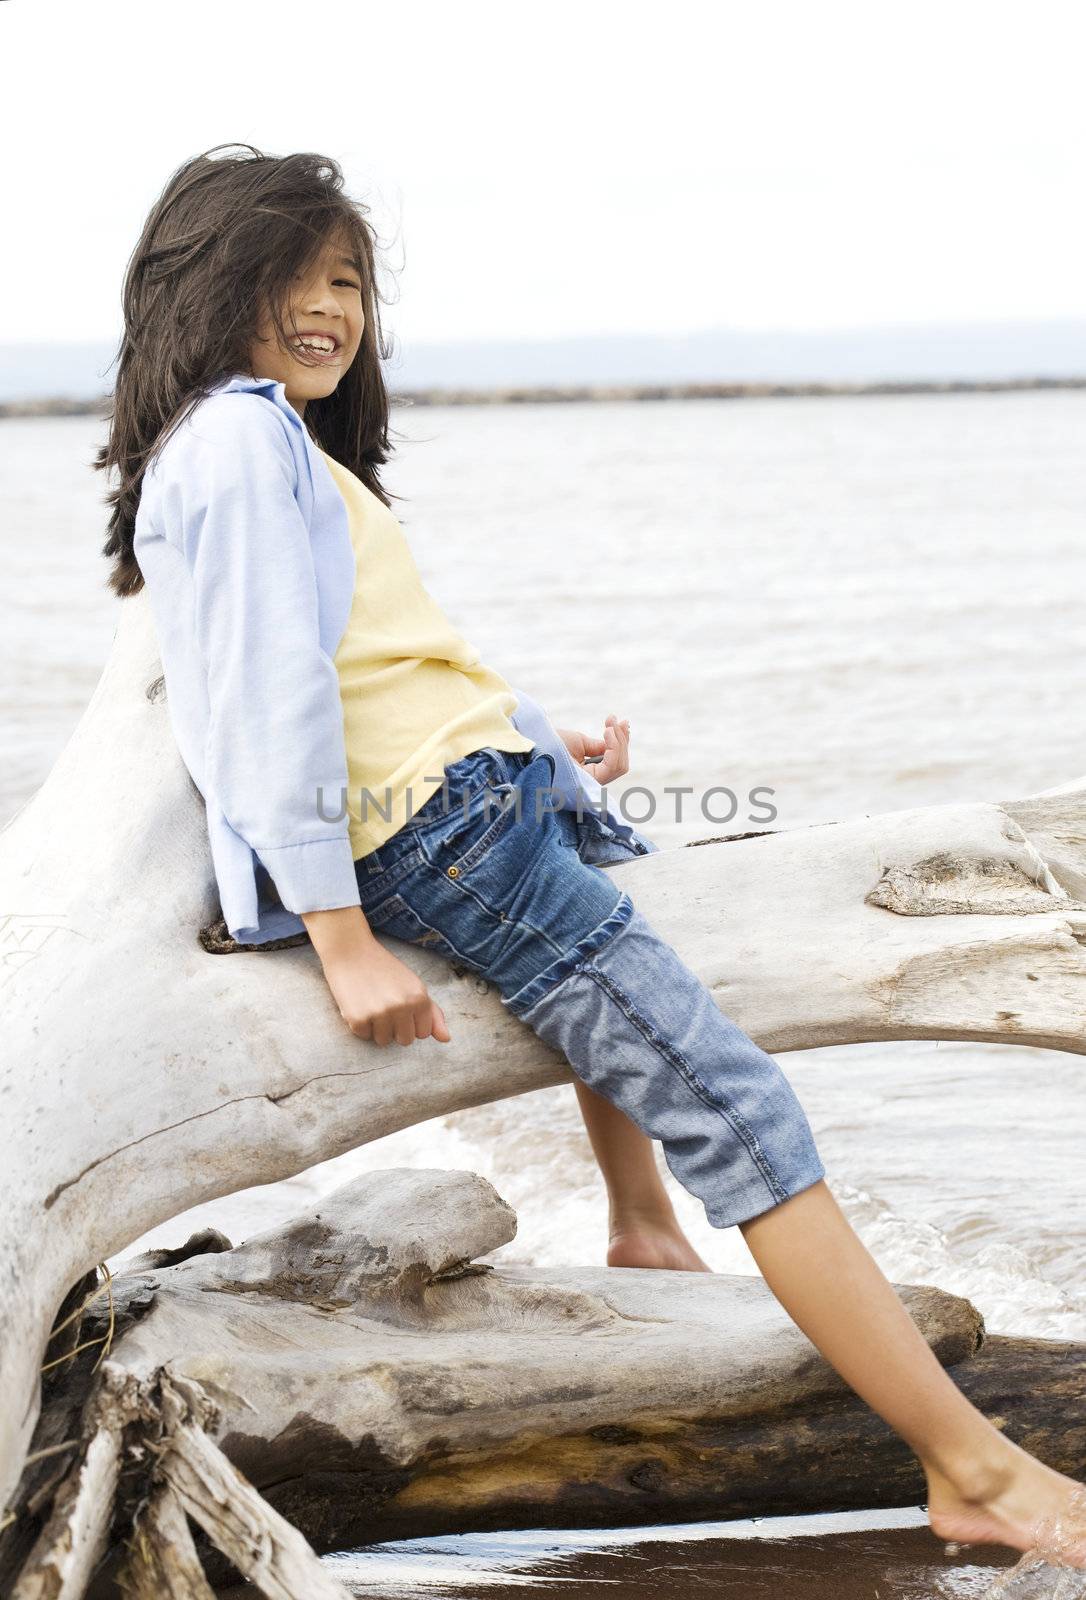 Little girl playing on fallen tree by lake shore in summer